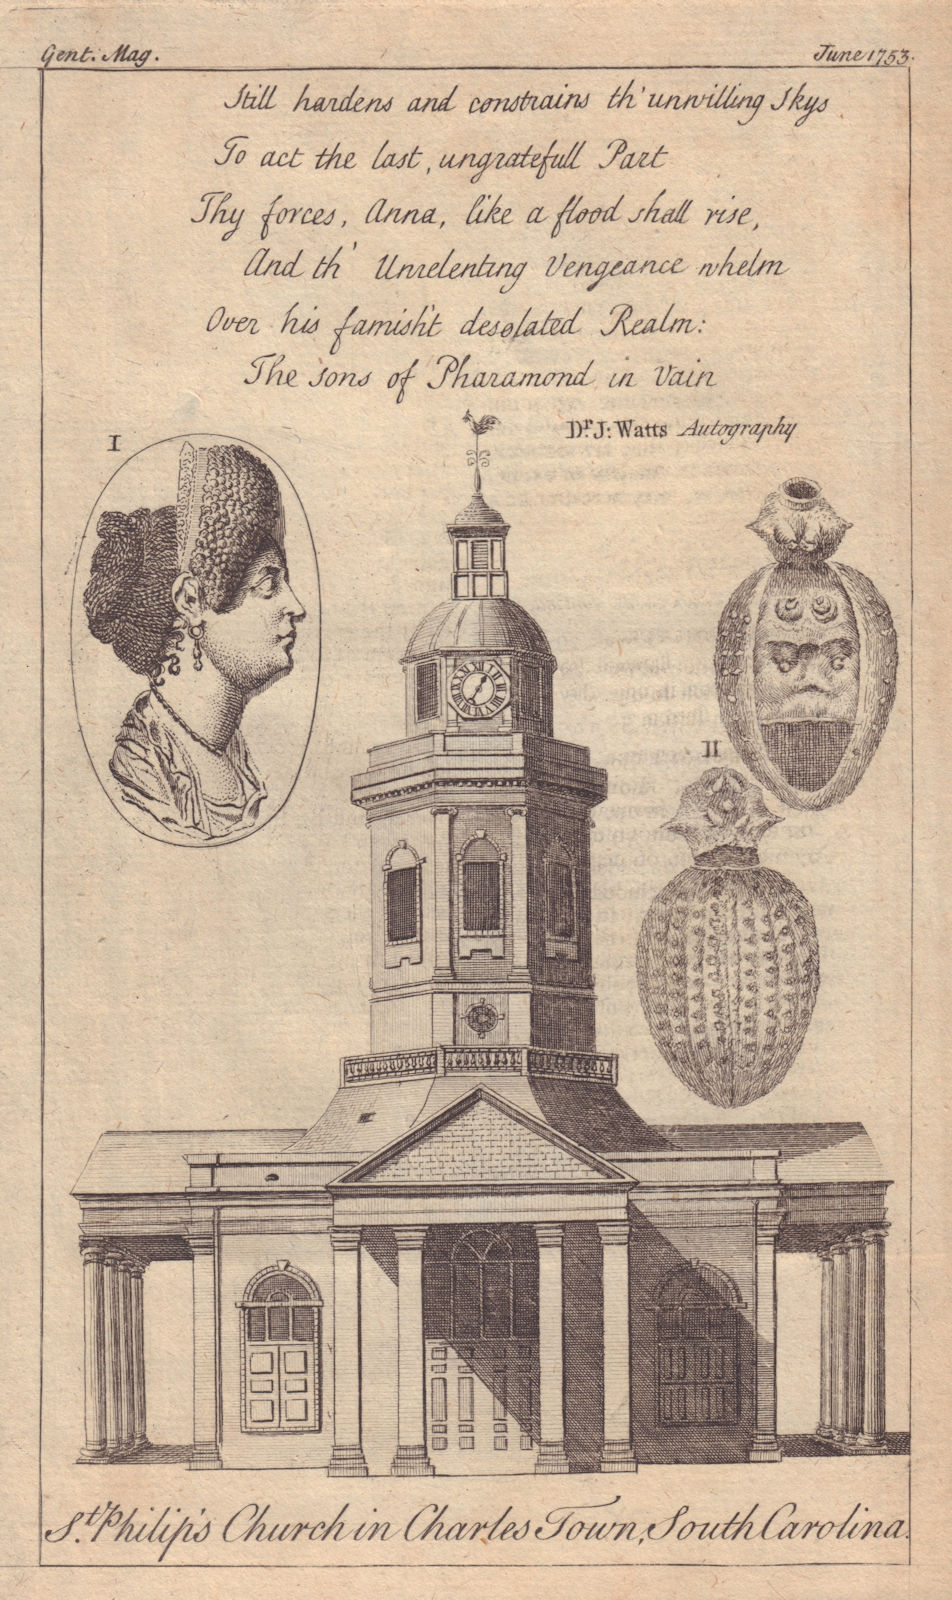 Associate Product St. Philip's Church in Charles Town, South Carolina. Charleston 1753 old print